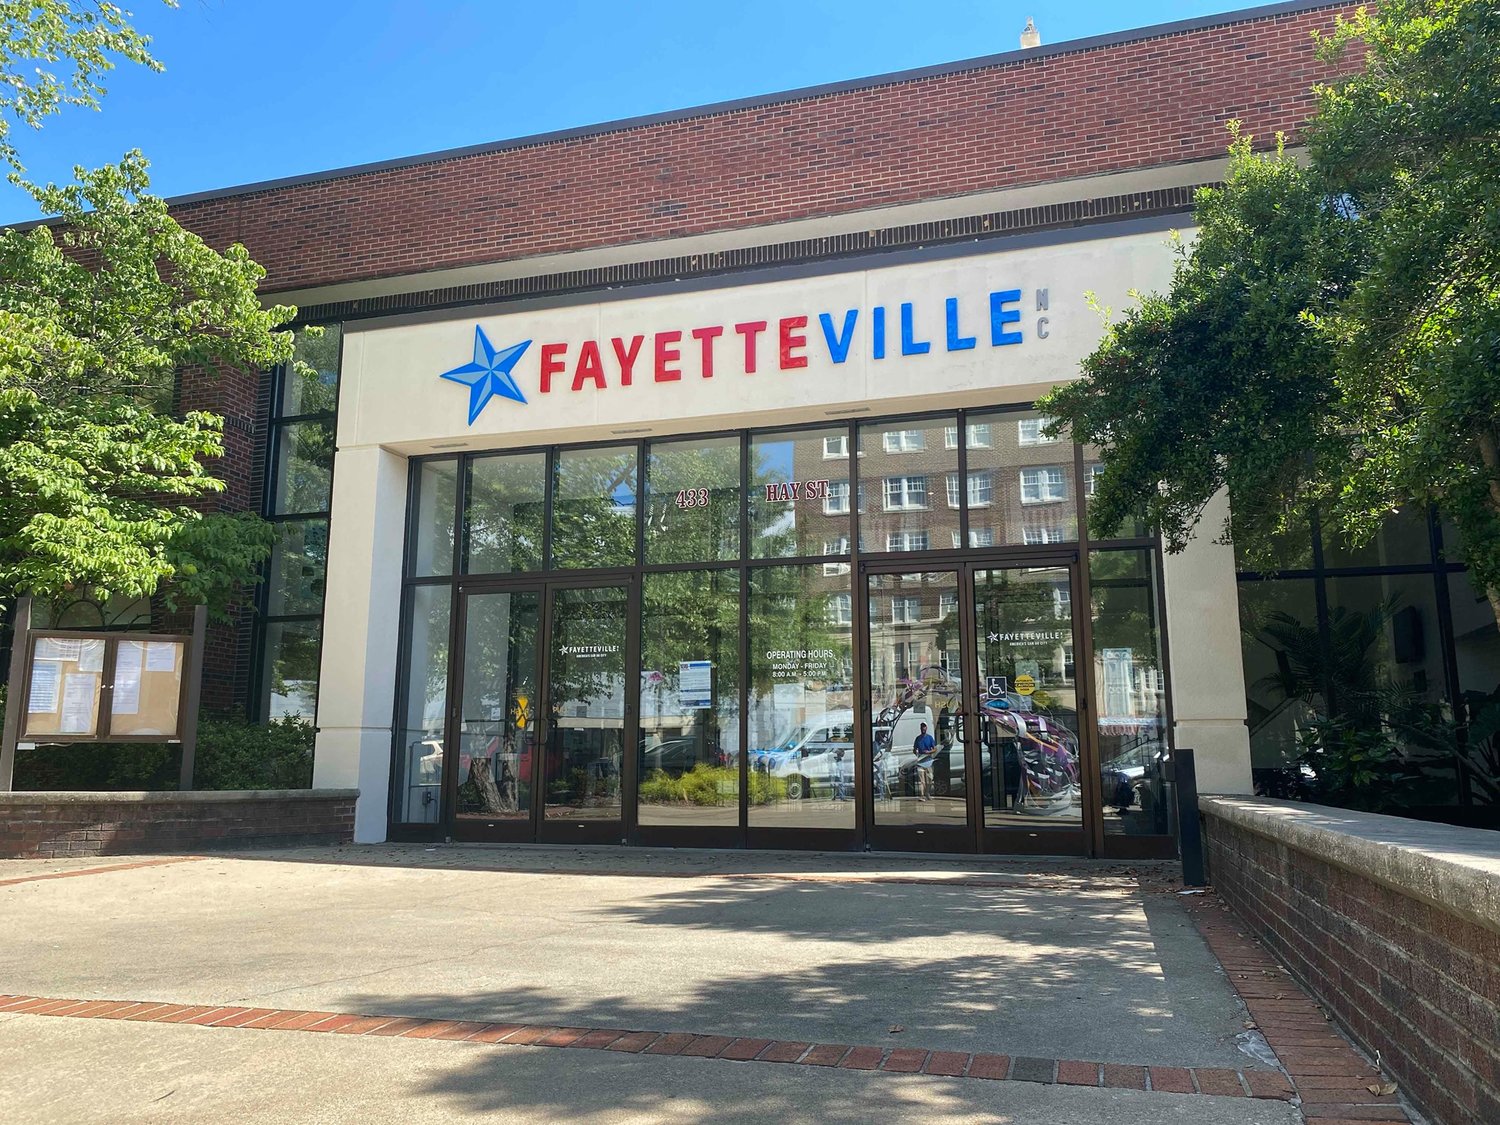 The Fayetteville Audit Committee plans to ask the City Council for an independent investigation into allegations made by former Councilwoman Tisha Waddell in her resignation letter in November.